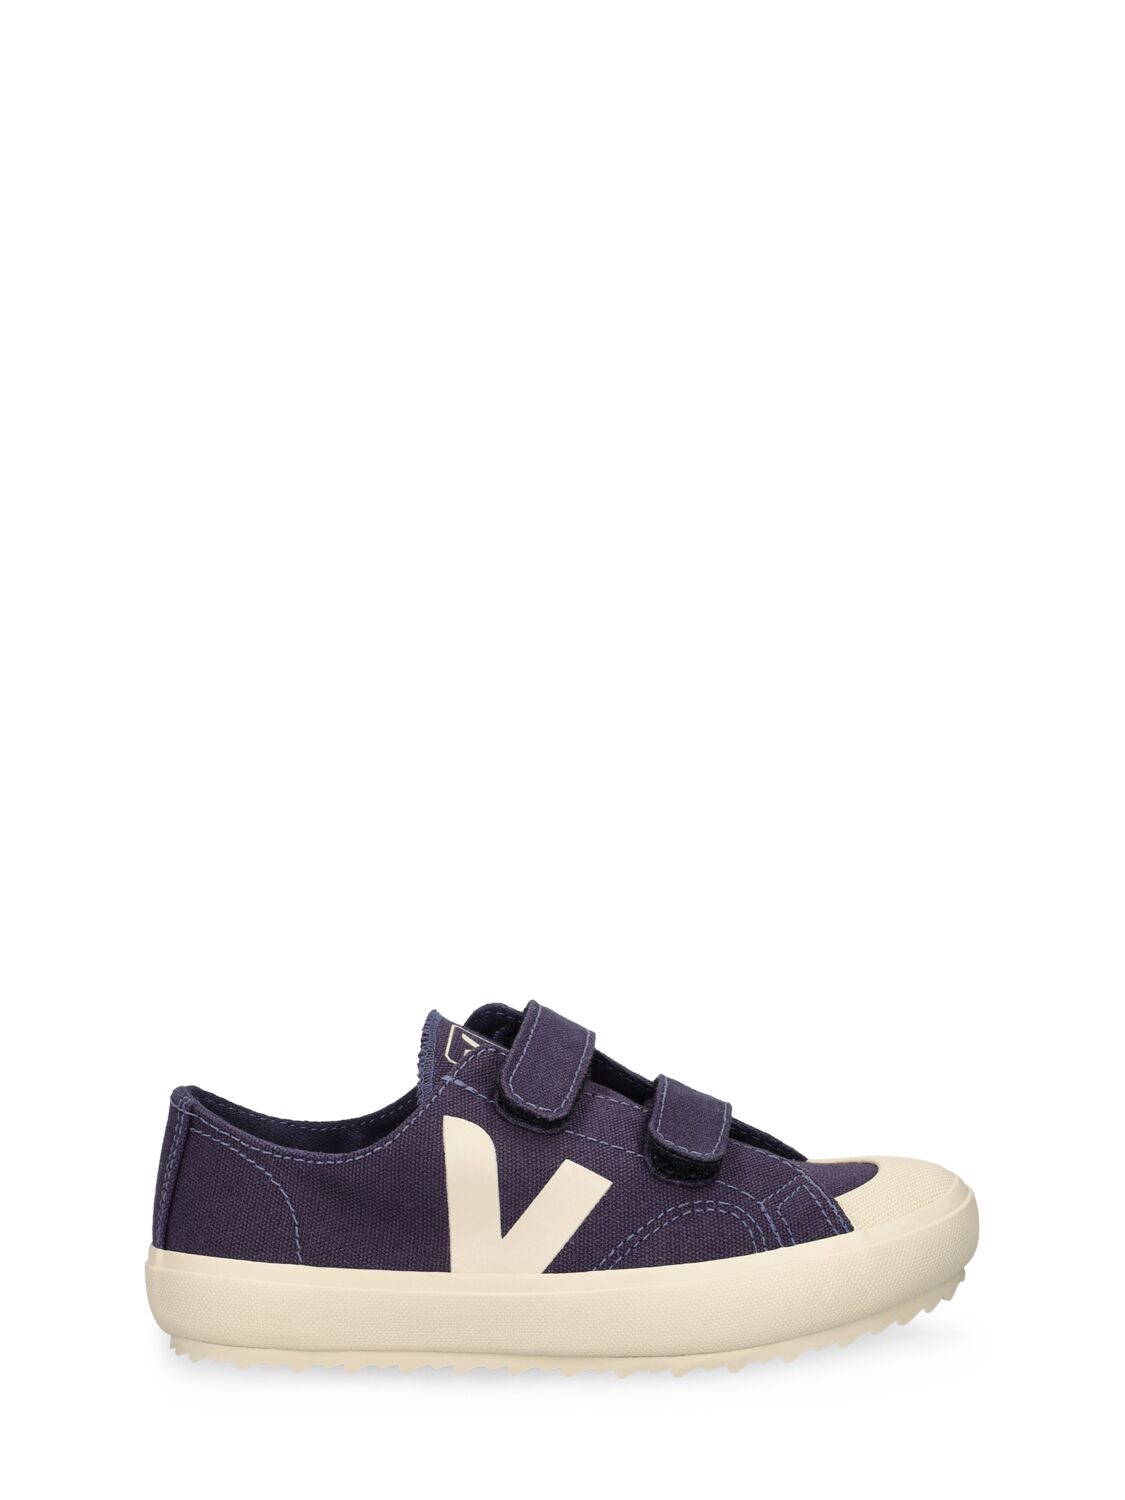 Veja Kids' Organic Cotton Canvas Strap Sneakers In Navy